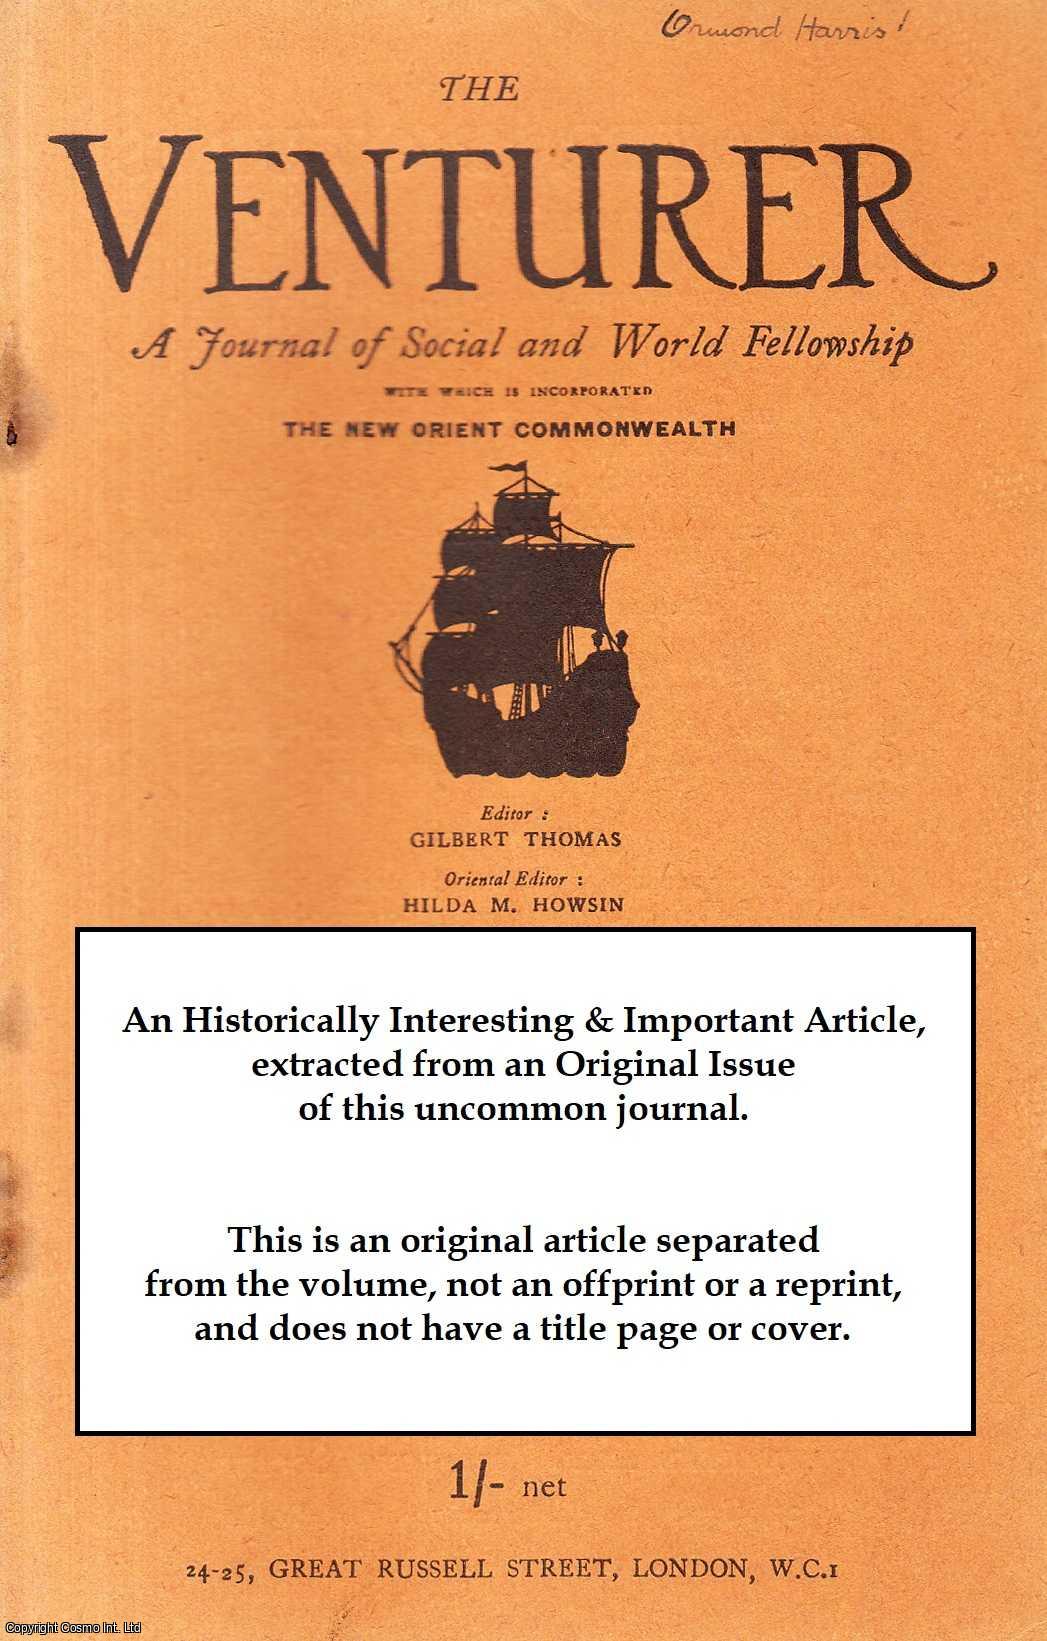 H.M. Howsin - India at the Imperial Conference. An original article from The Venturer, a Journal of Social and World Fellowship, 1921.